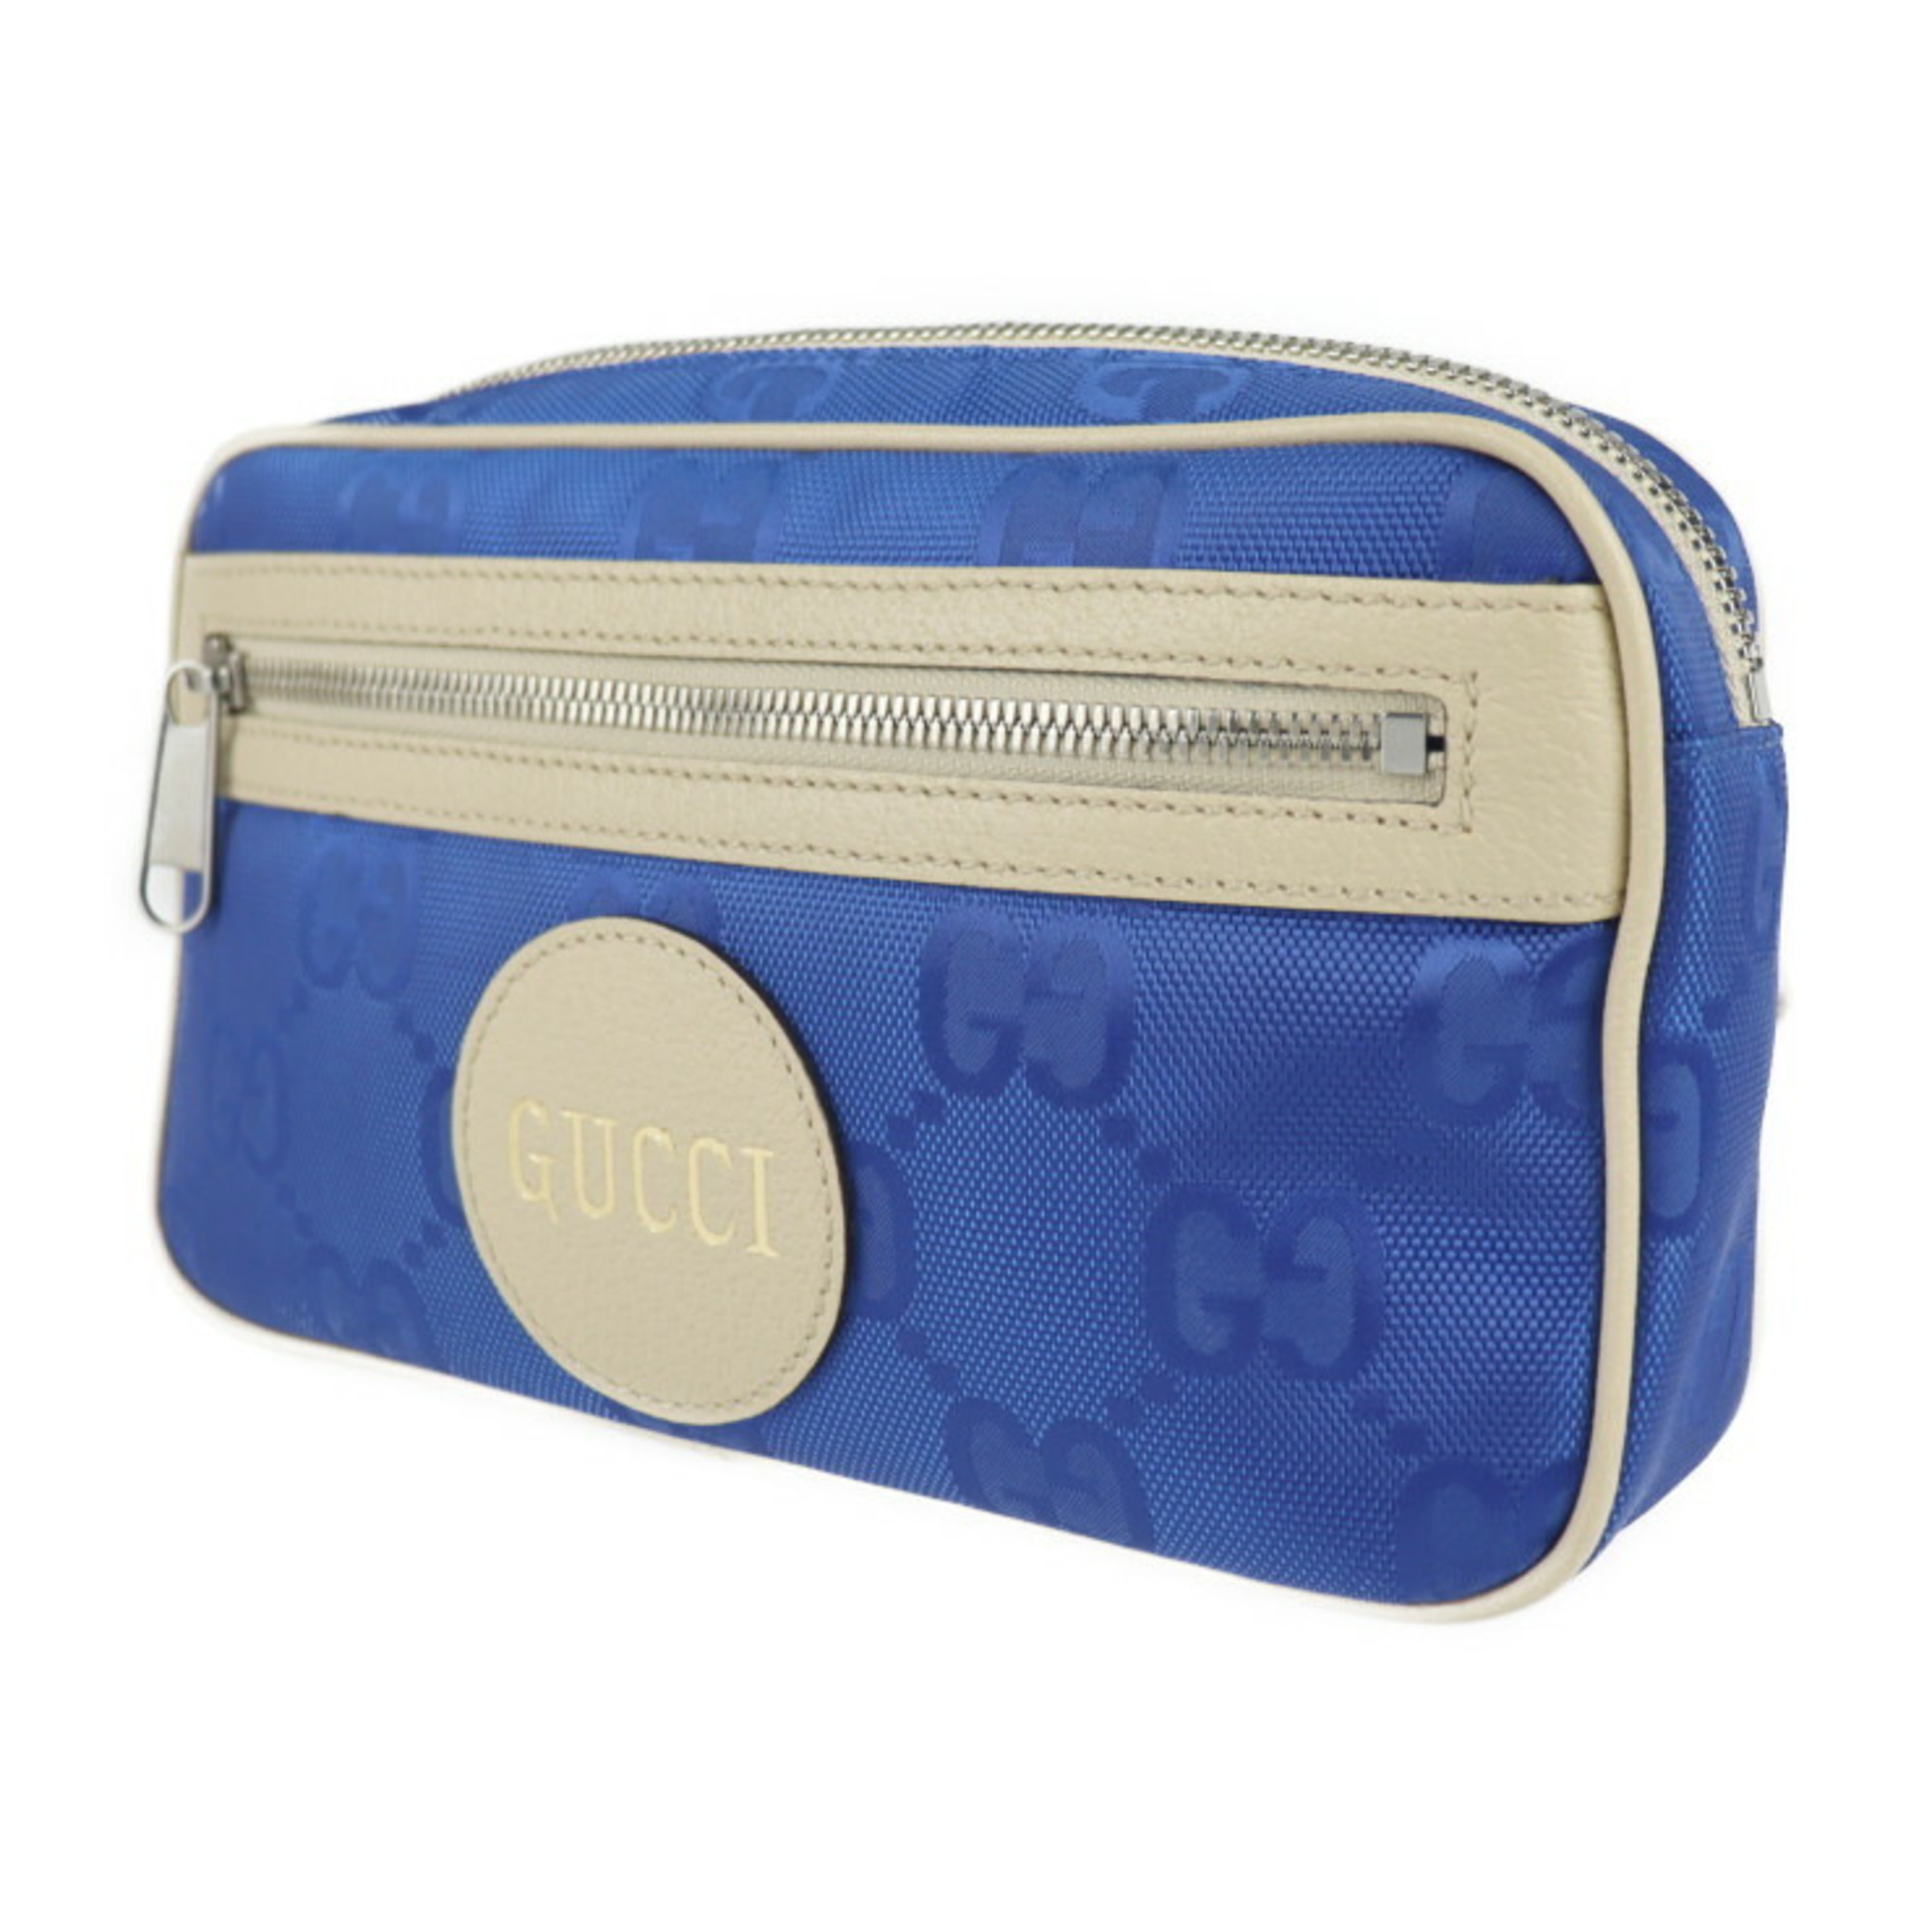 GUCCI Gucci Off The Grid Belt Bag Body 631341 Nylon Leather Blue Beige Pouch Waist One Shoulder Japan Limited